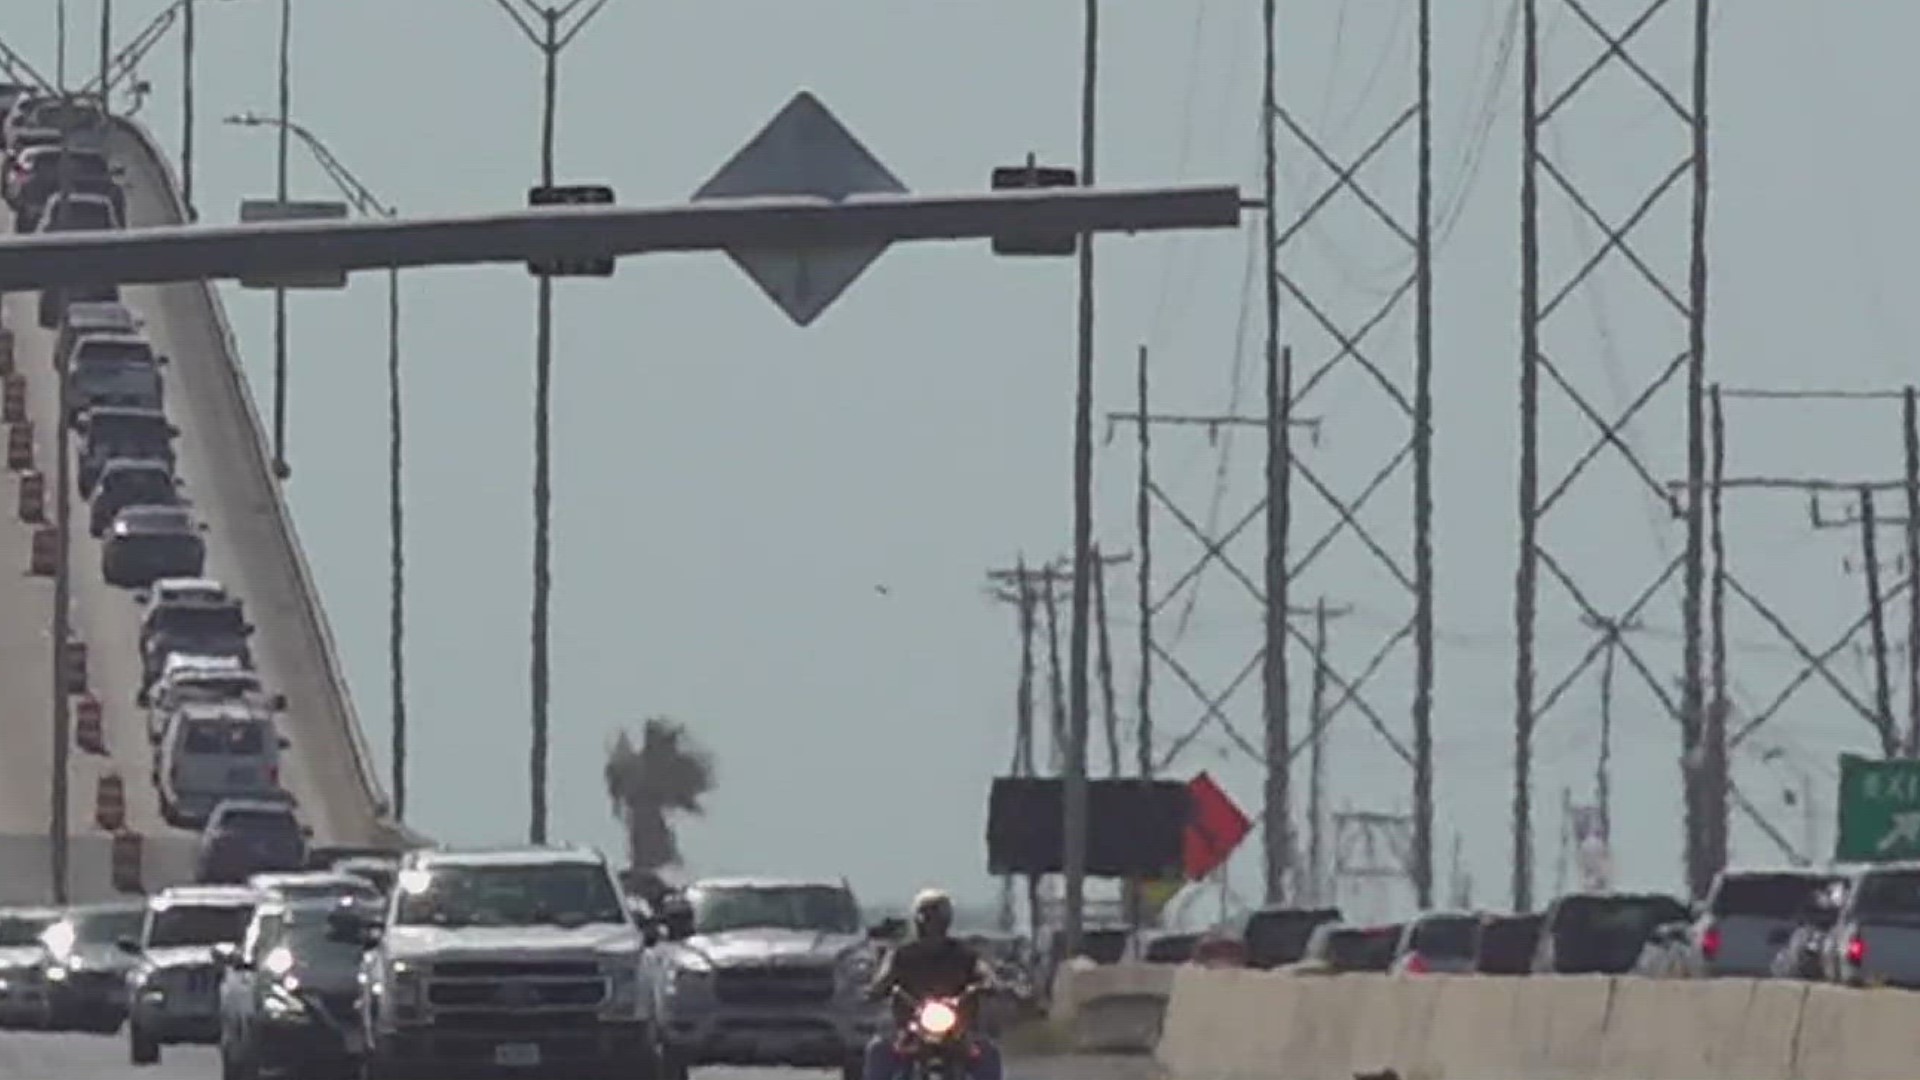 TxDOT crews began installing 3,900 feet of concrete barrier on the causeway. That work requiring the closure of the inside lanes in both directions.